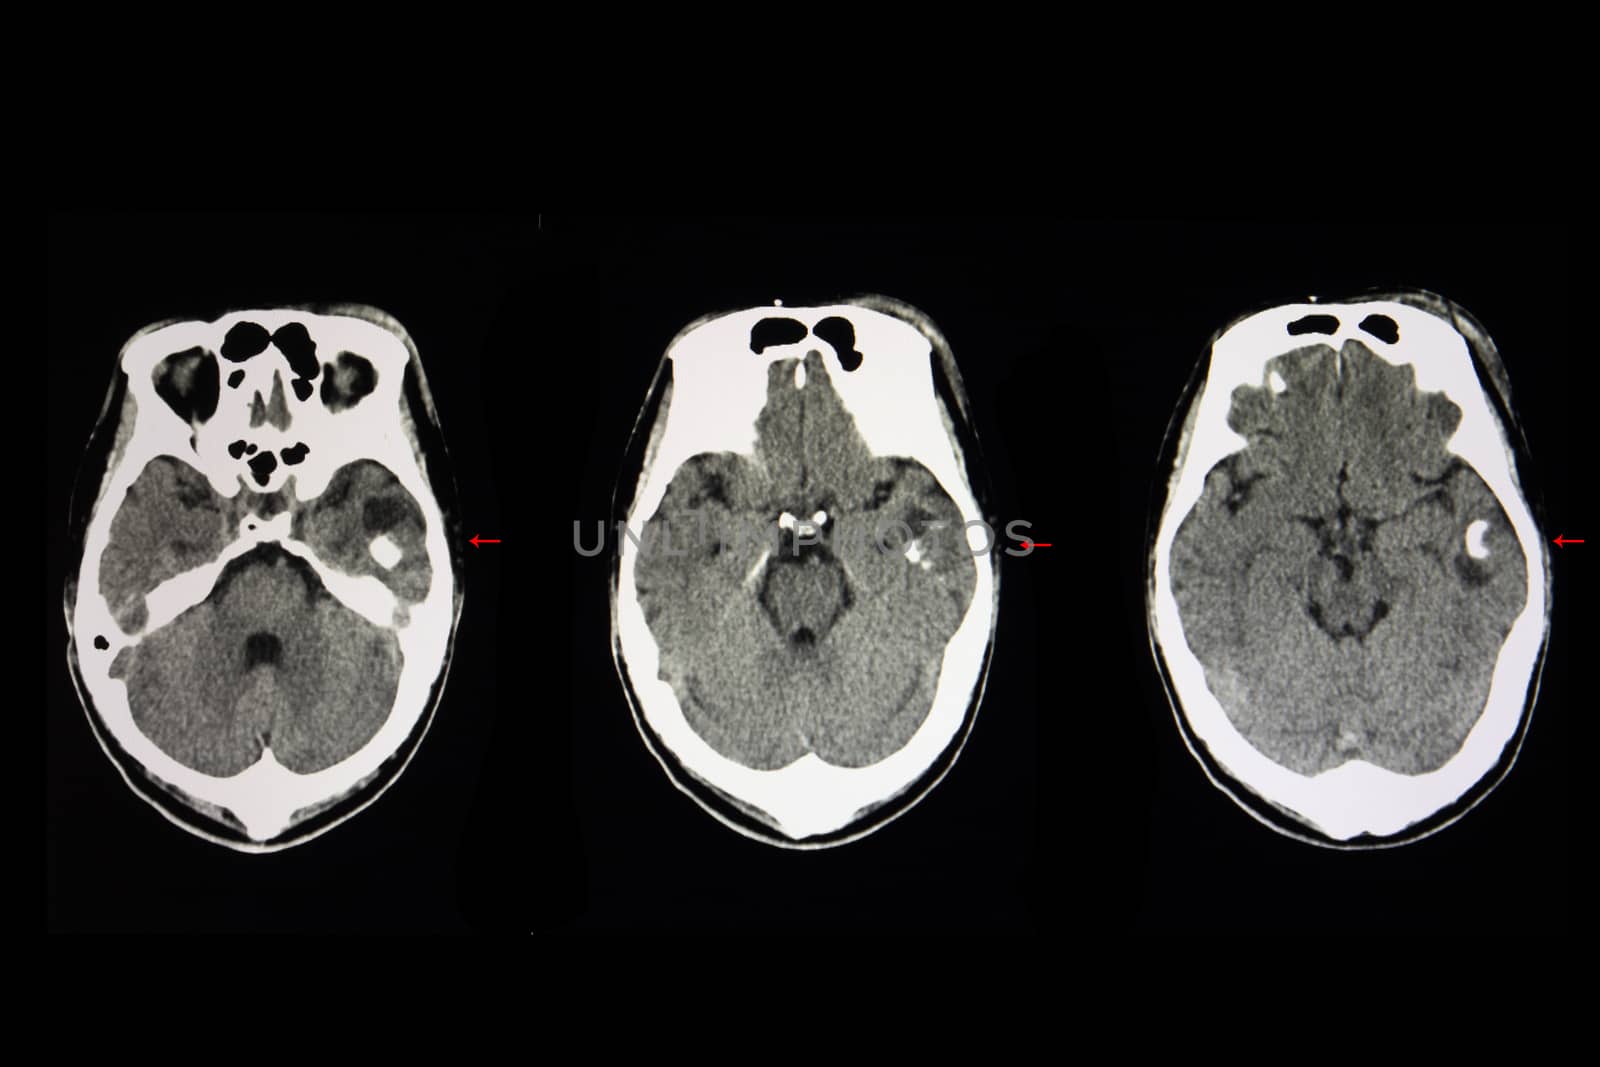 A CT brain with radiopaque material injected. A large cyctic tumor with internal enhancing lesions is shown in the left temporal lobe. CT scan of a malignant brain cancer.